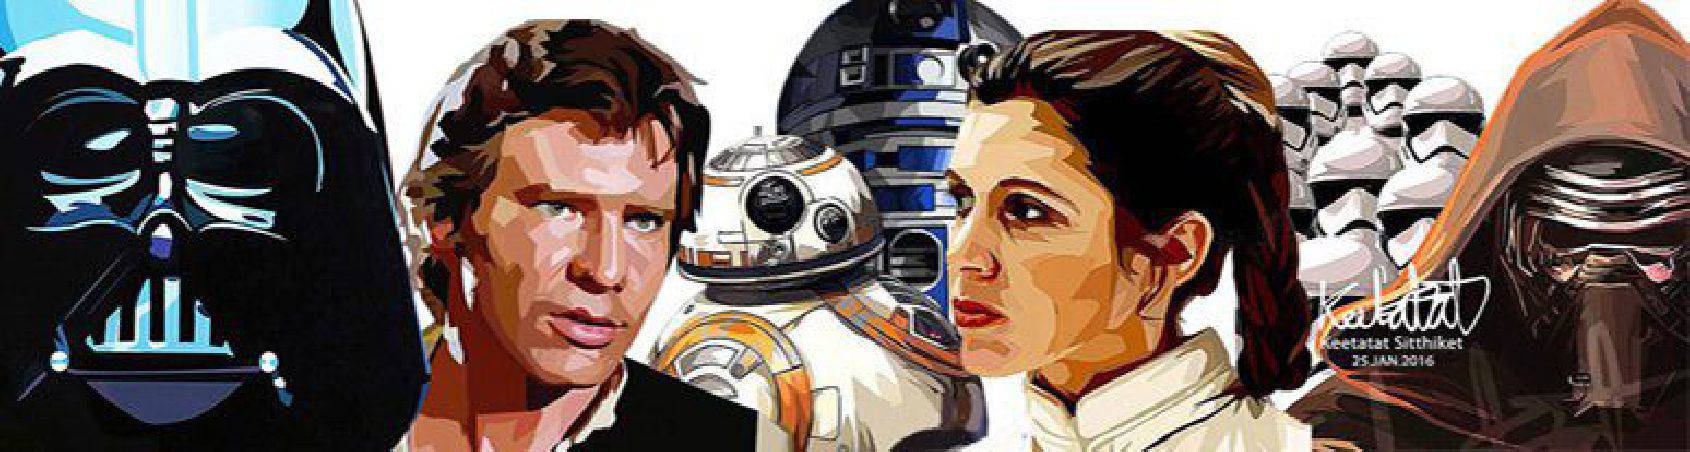 pictures and scenes Pop Art Star Wars saga characters - To buy